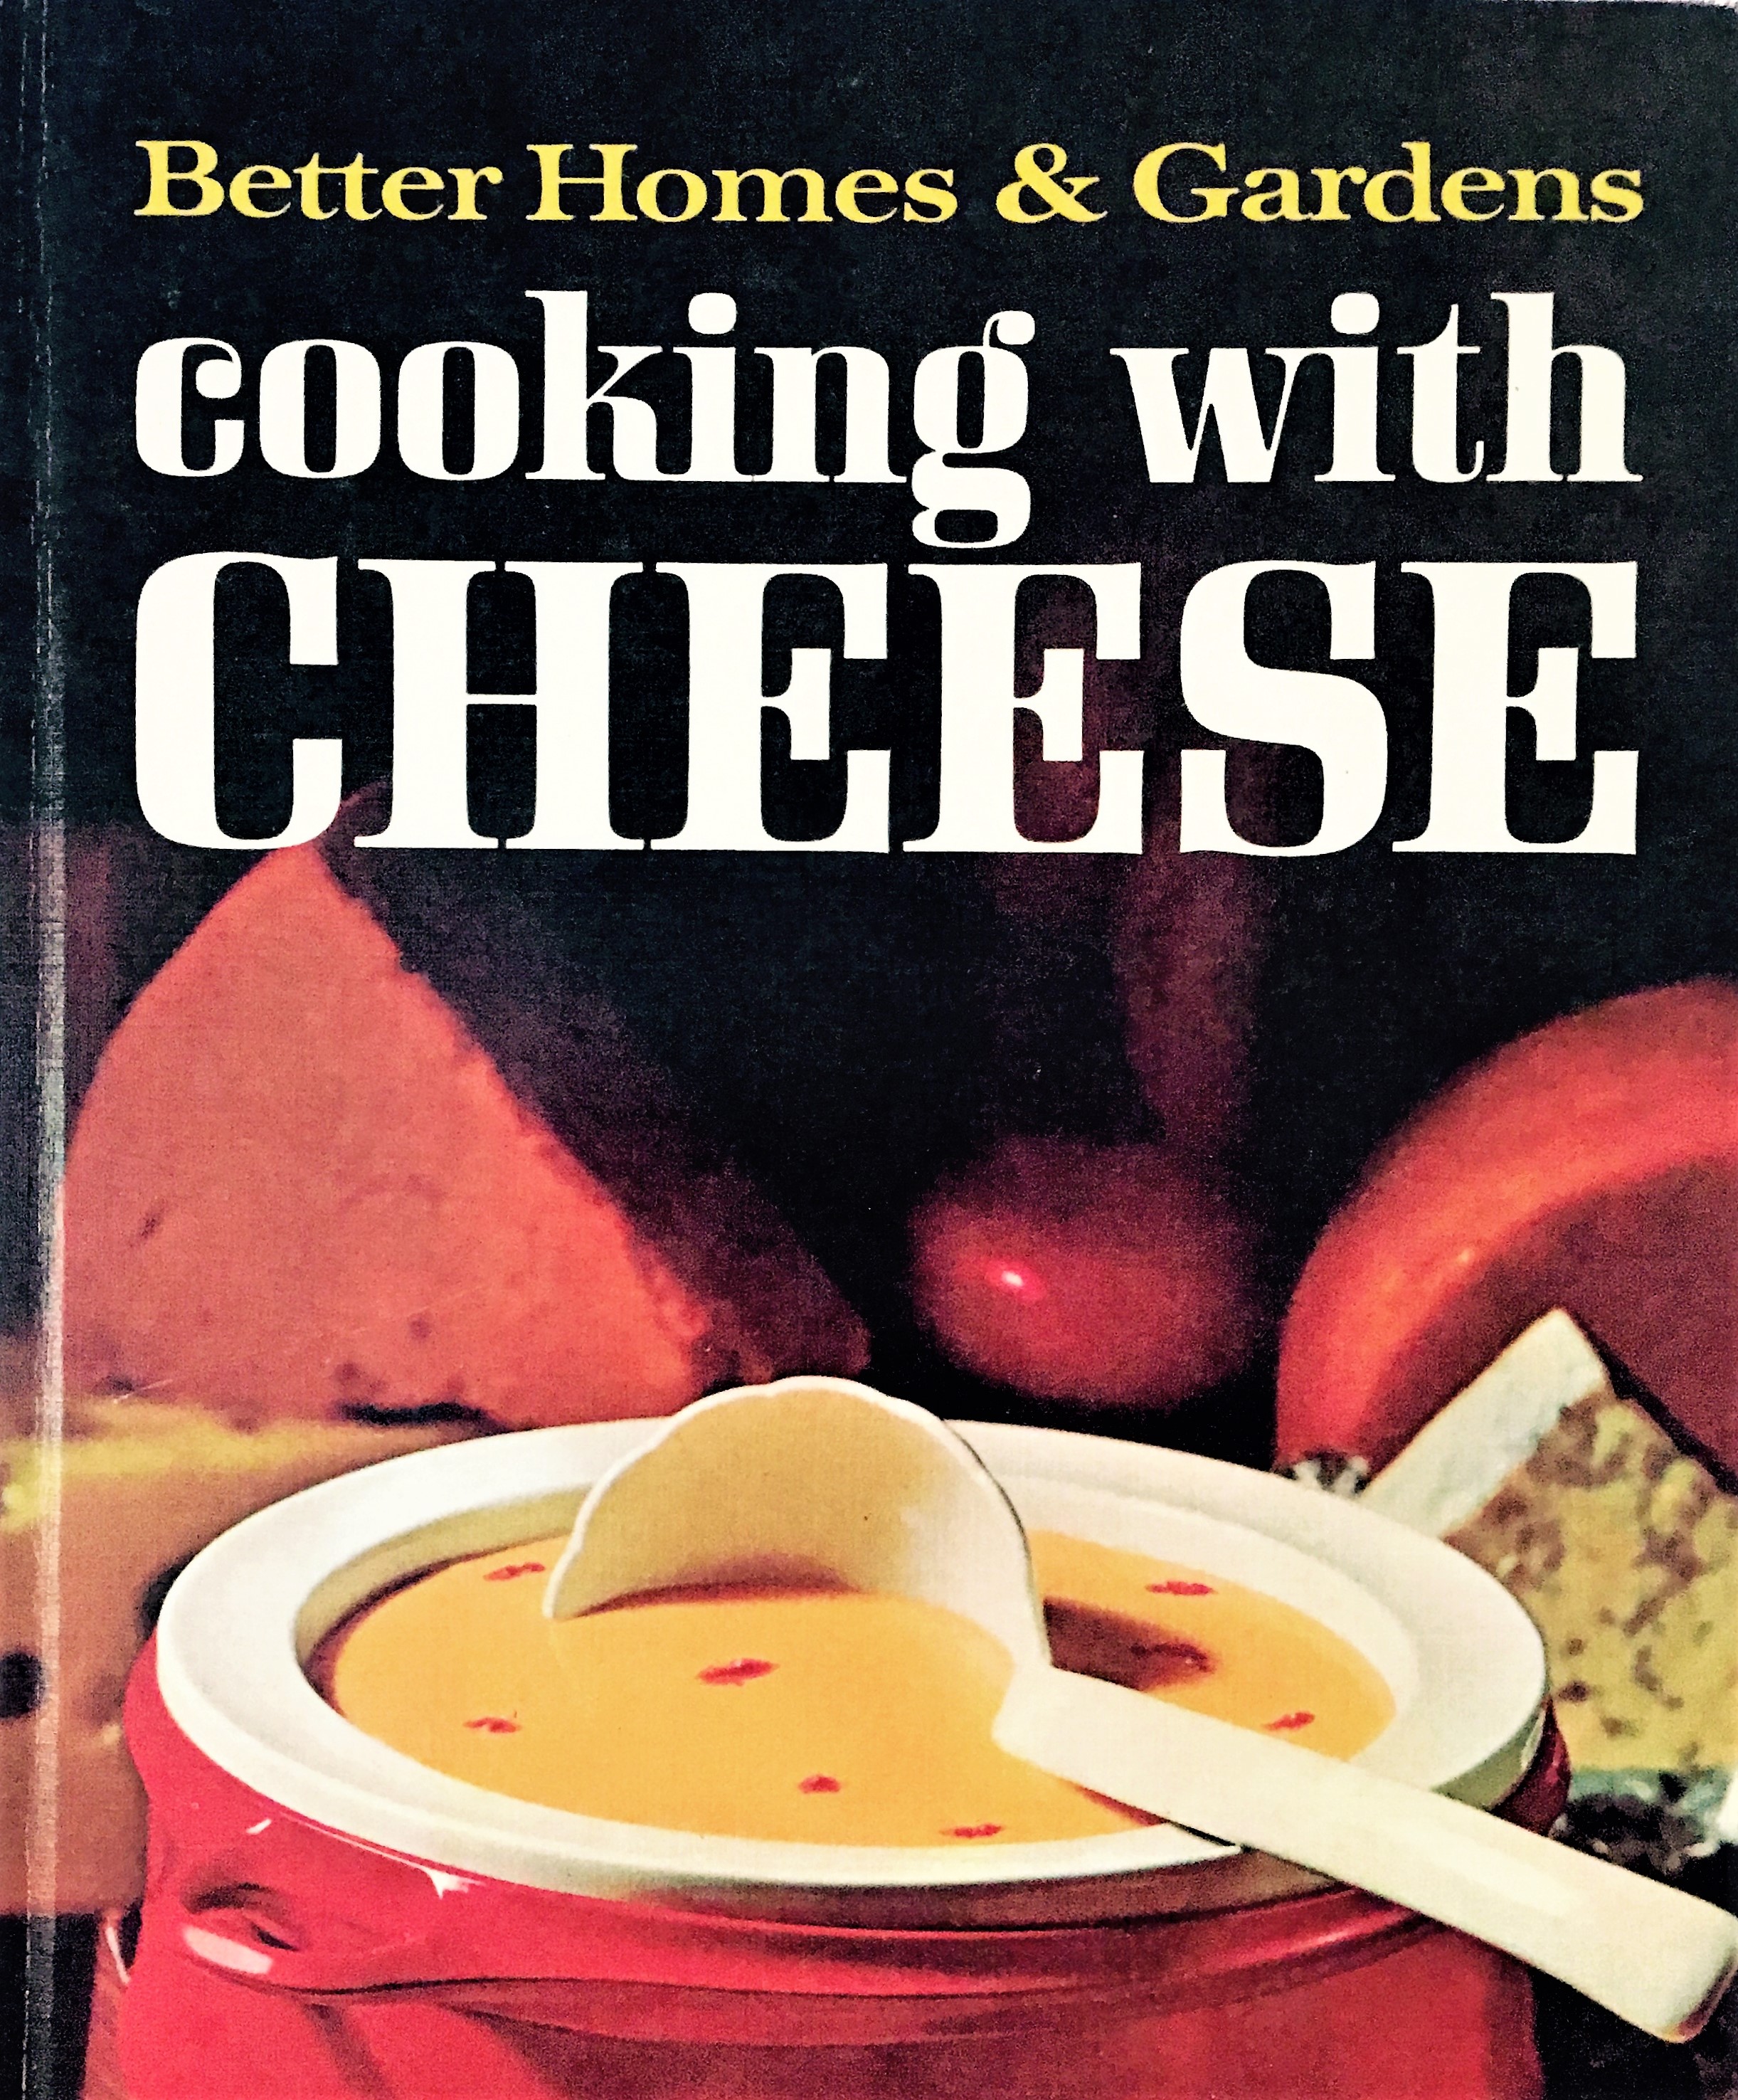 Better Homes and Garden Cheese Cookbook